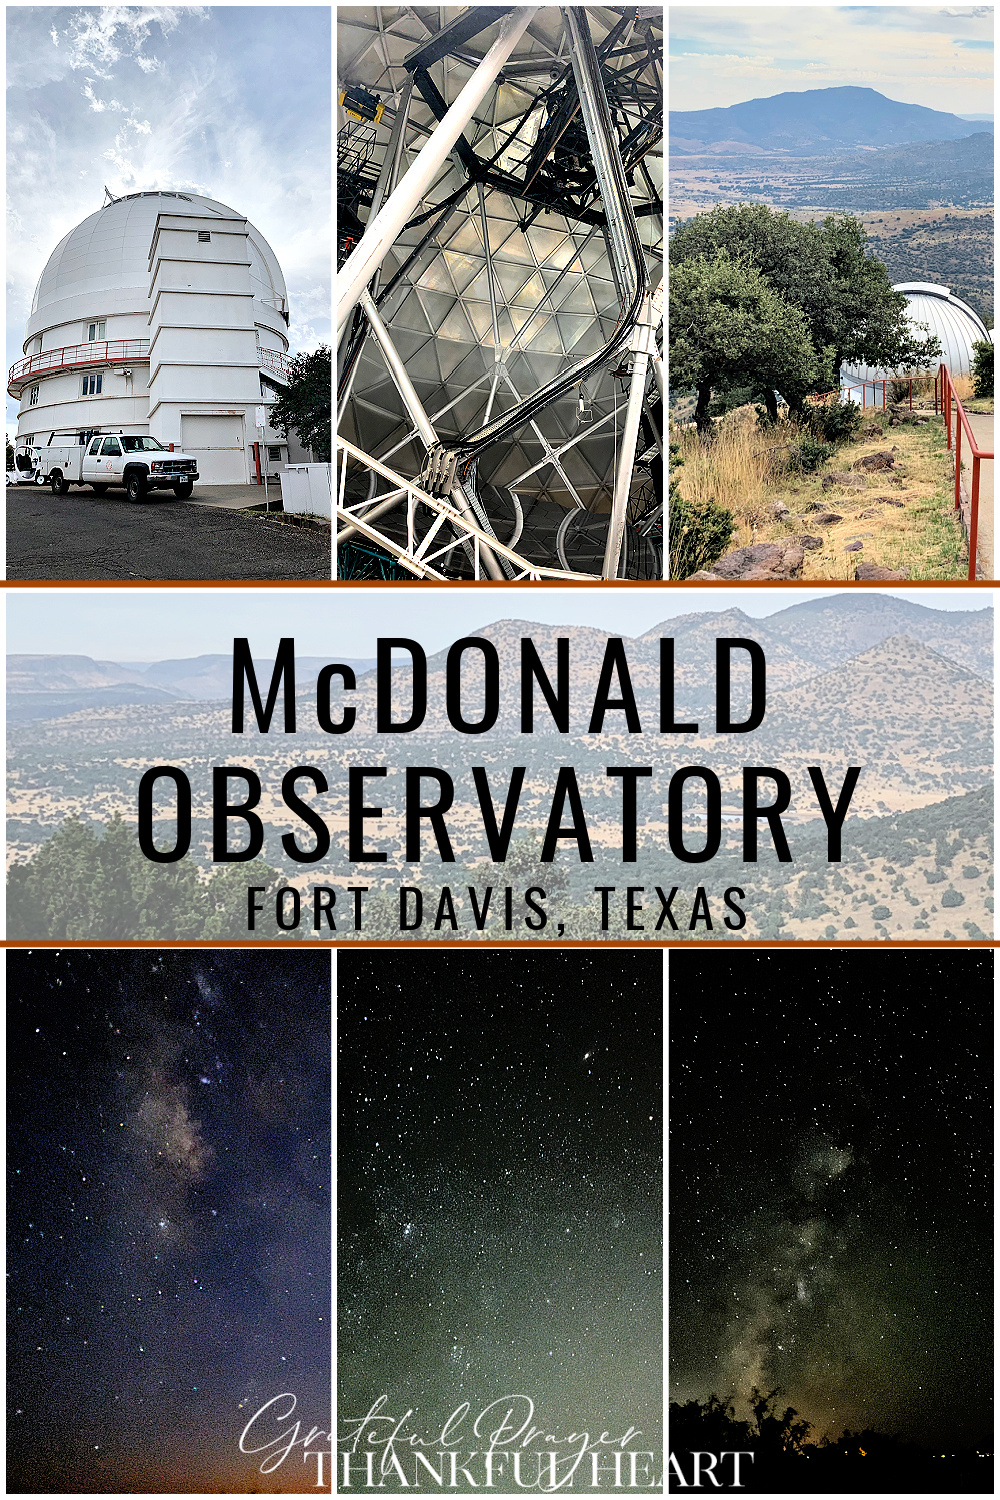 McDonald Observatory Research Facility Fort Davis, Texas visitor guide.